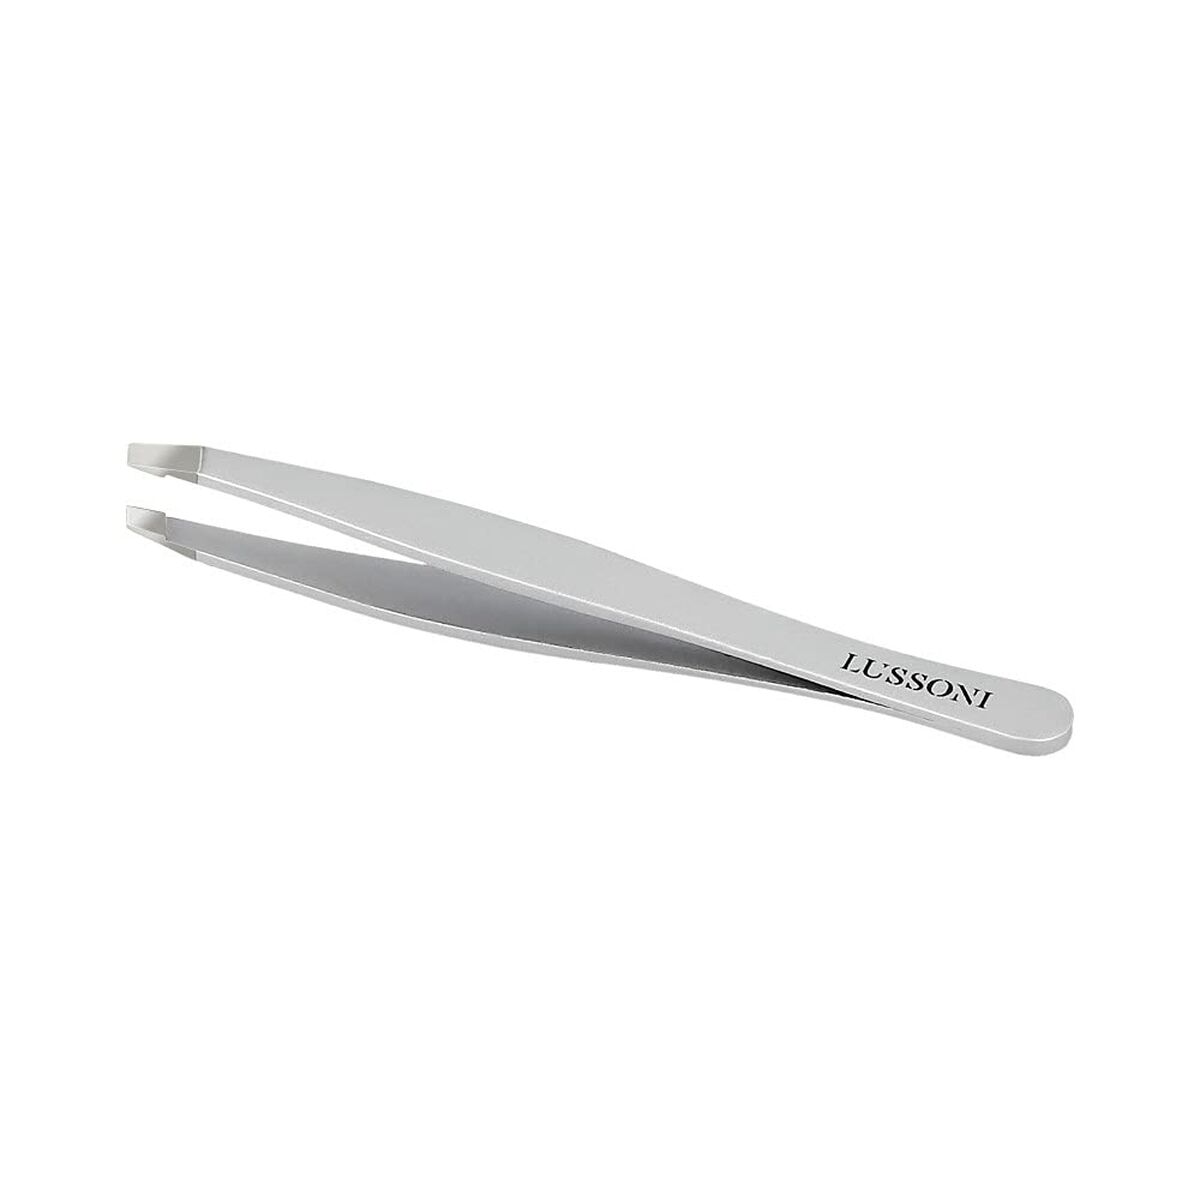 Tweezers for Plucking Lussoni Angled point